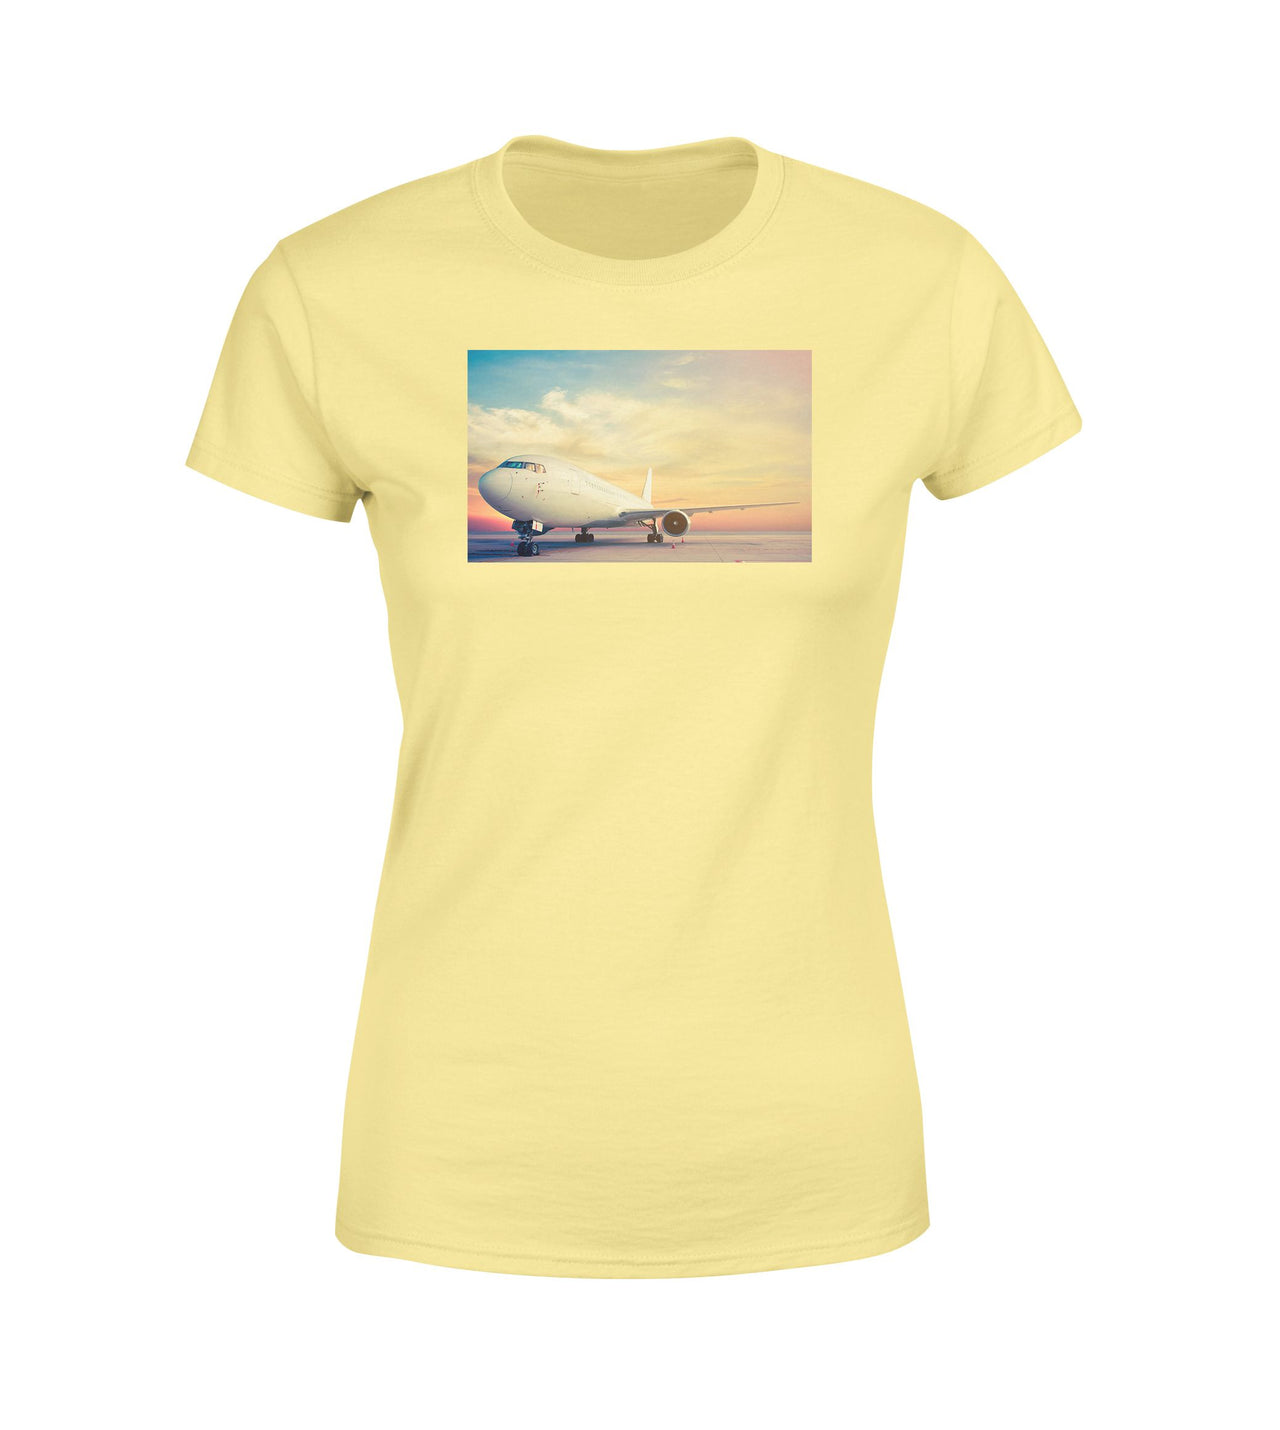 Parked Aircraft During Sunset Designed Women T-Shirts